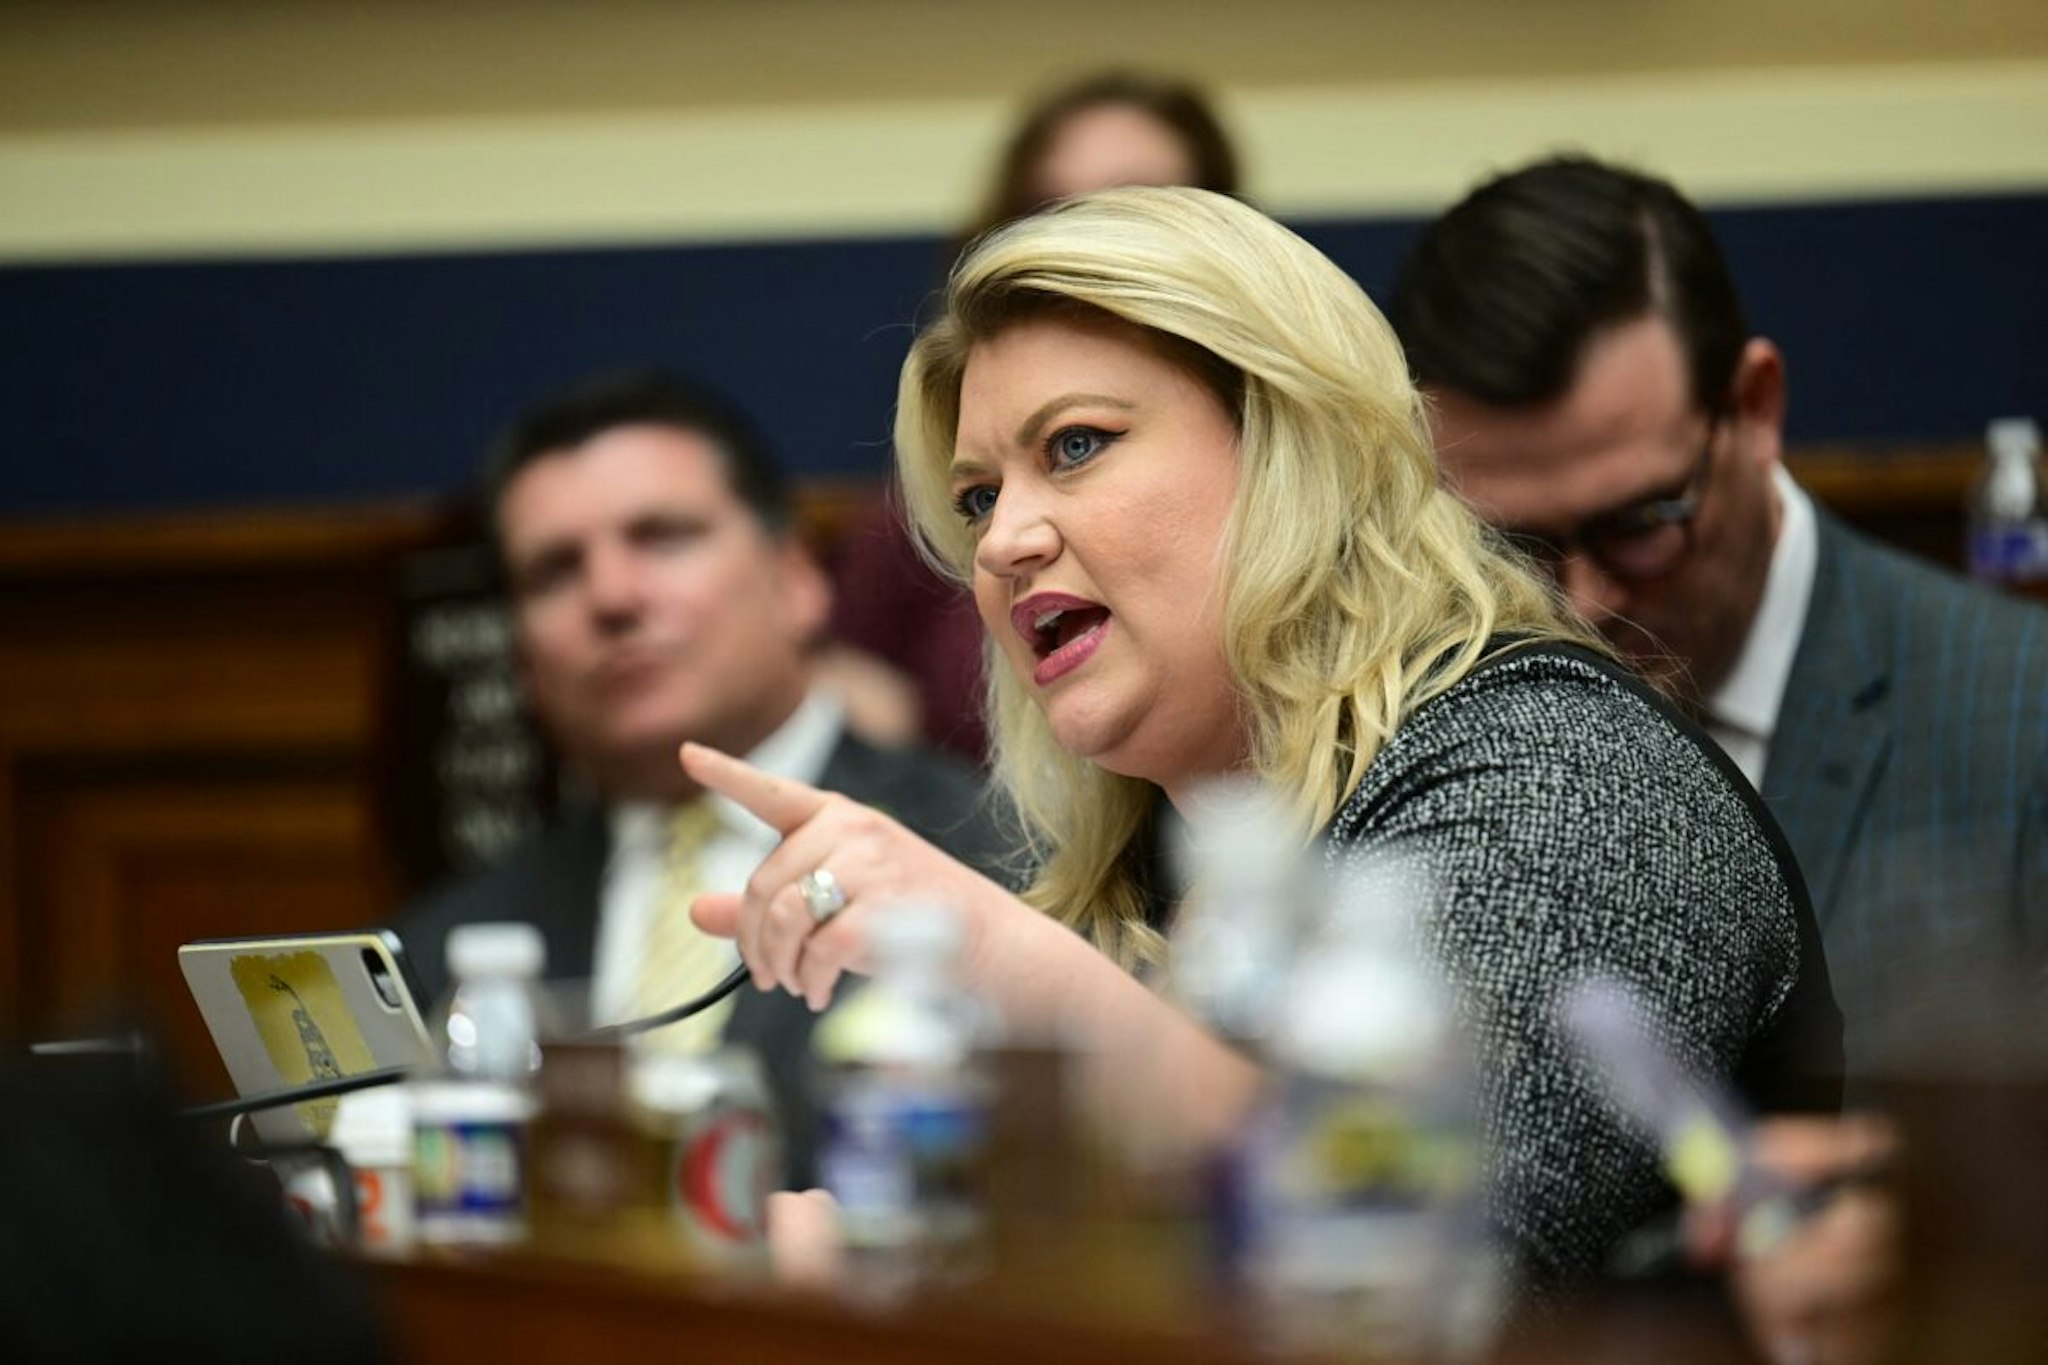 US Representative Kat Cammack, Republican of Florida, questions TikTok CEO Shou Zi Chew during the House Energy and Commerce Committee hearing on "TikTok: How Congress Can Safeguard American Data Privacy and Protect Children from Online Harms," on Capitol Hill, March 23, 2023, in Washington, DC.